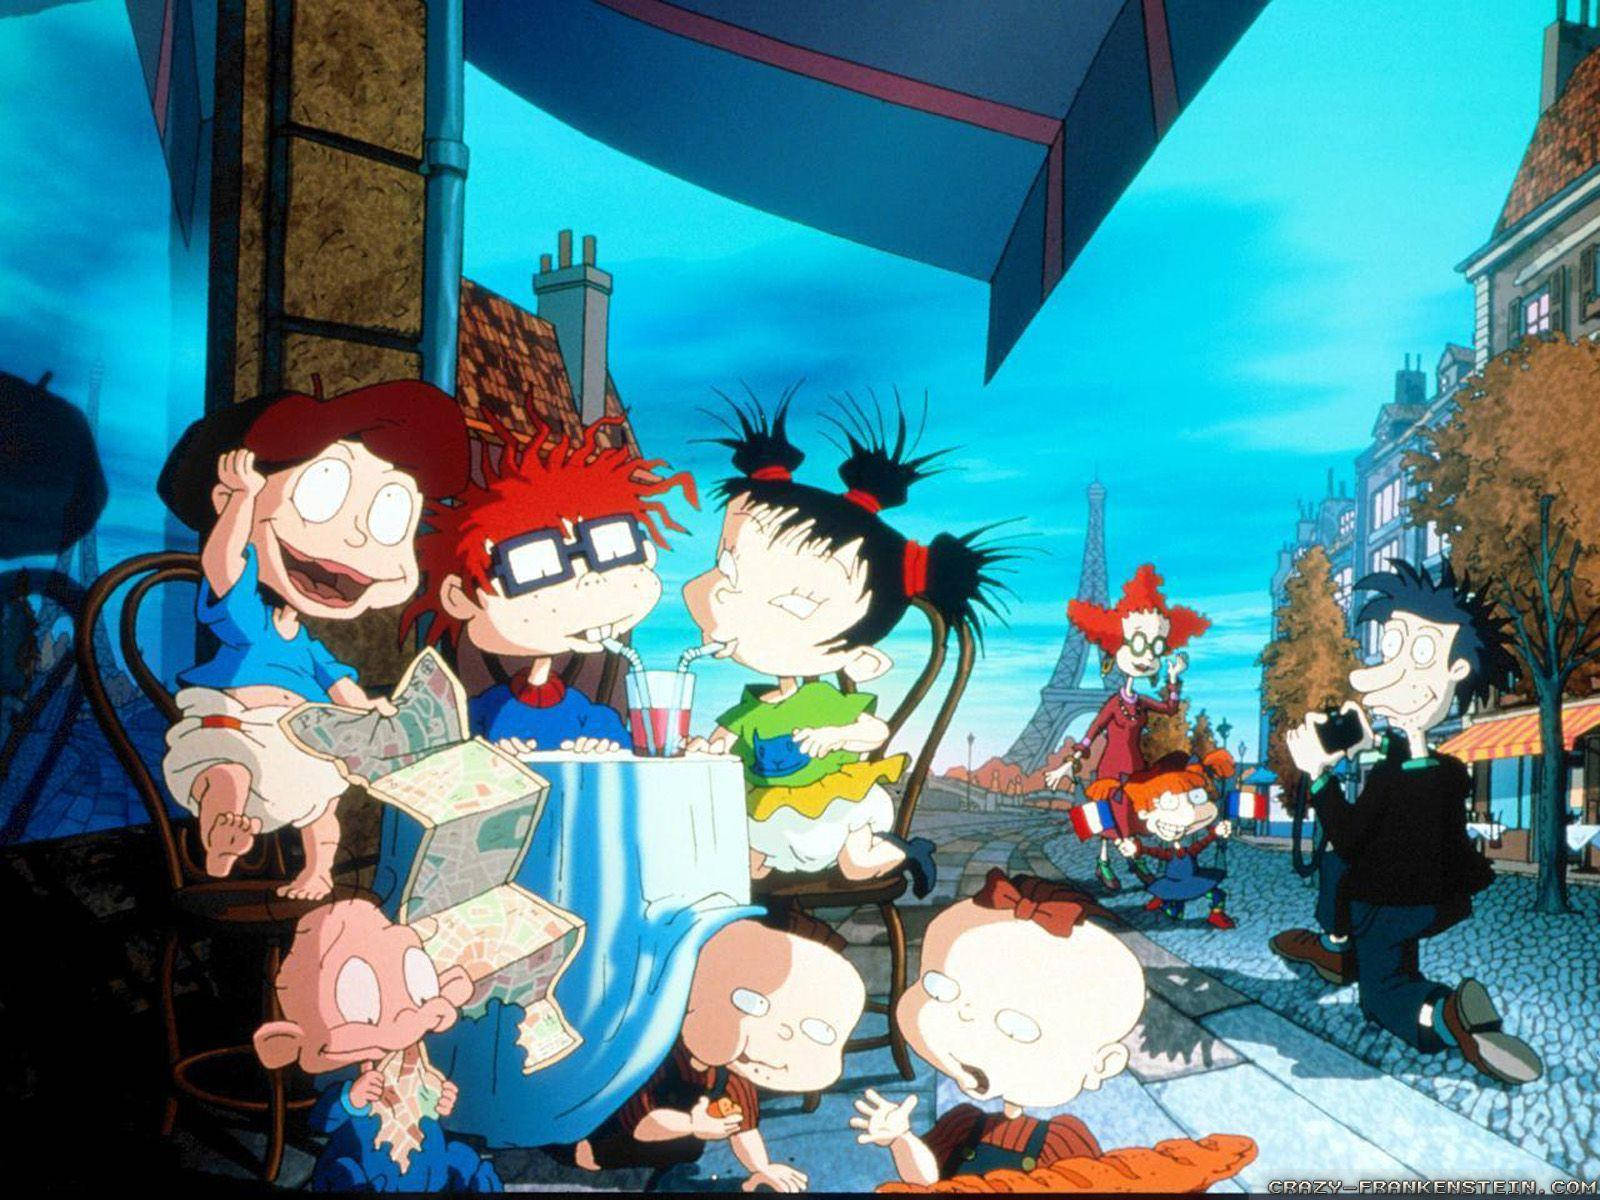 Life’s an Adventure for the Rugrats! Wallpaper